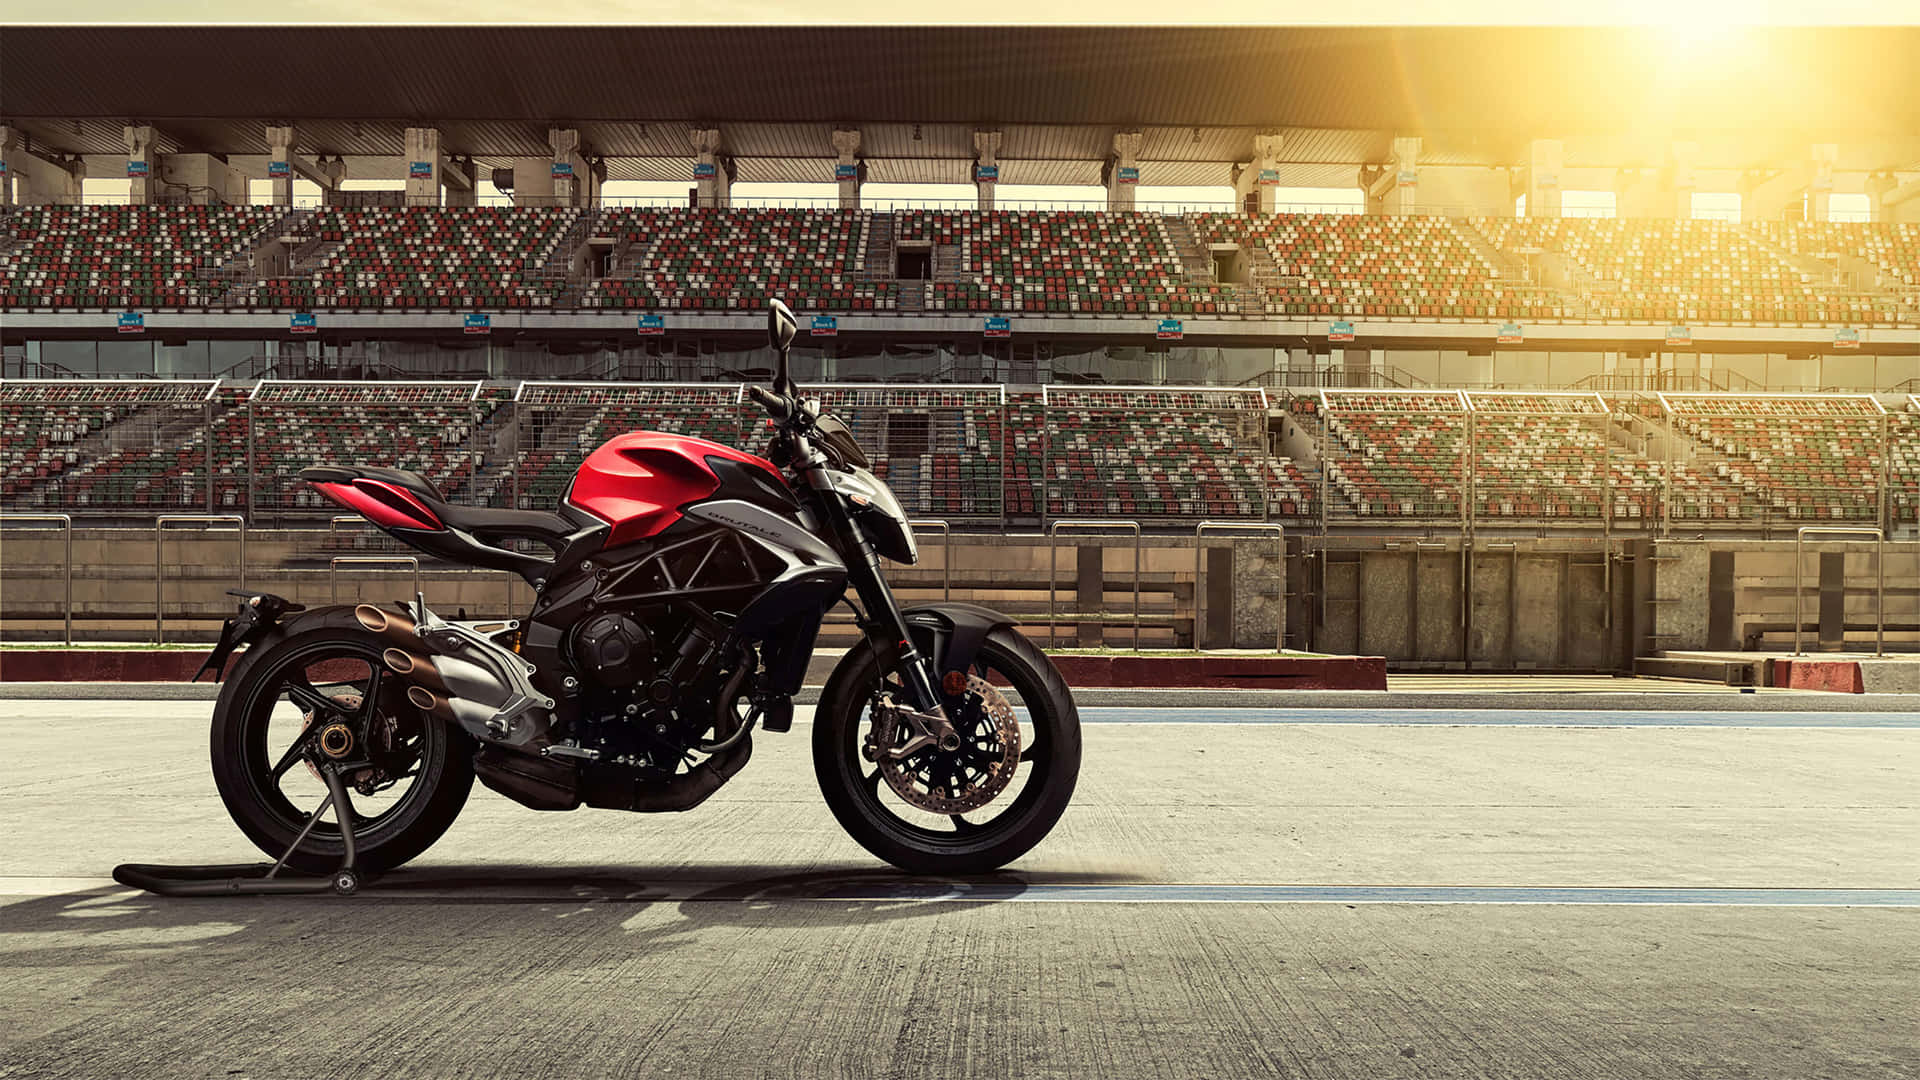 Exquisite Race-ready Machine, Mv Agusta Motorcycle Wallpaper